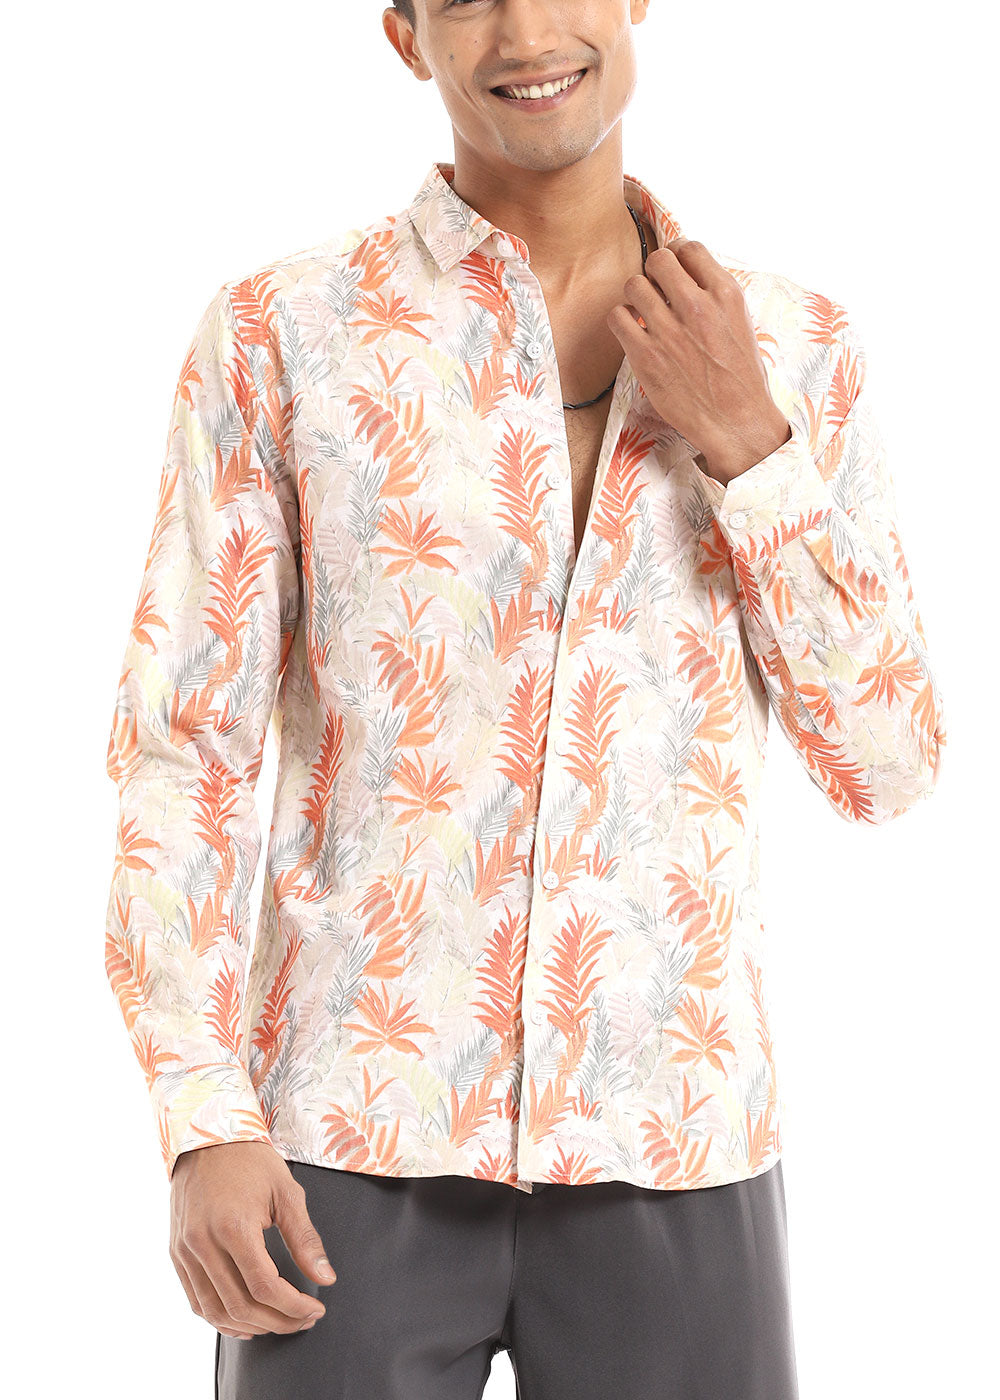 Get Feather Floral Printed Shirts